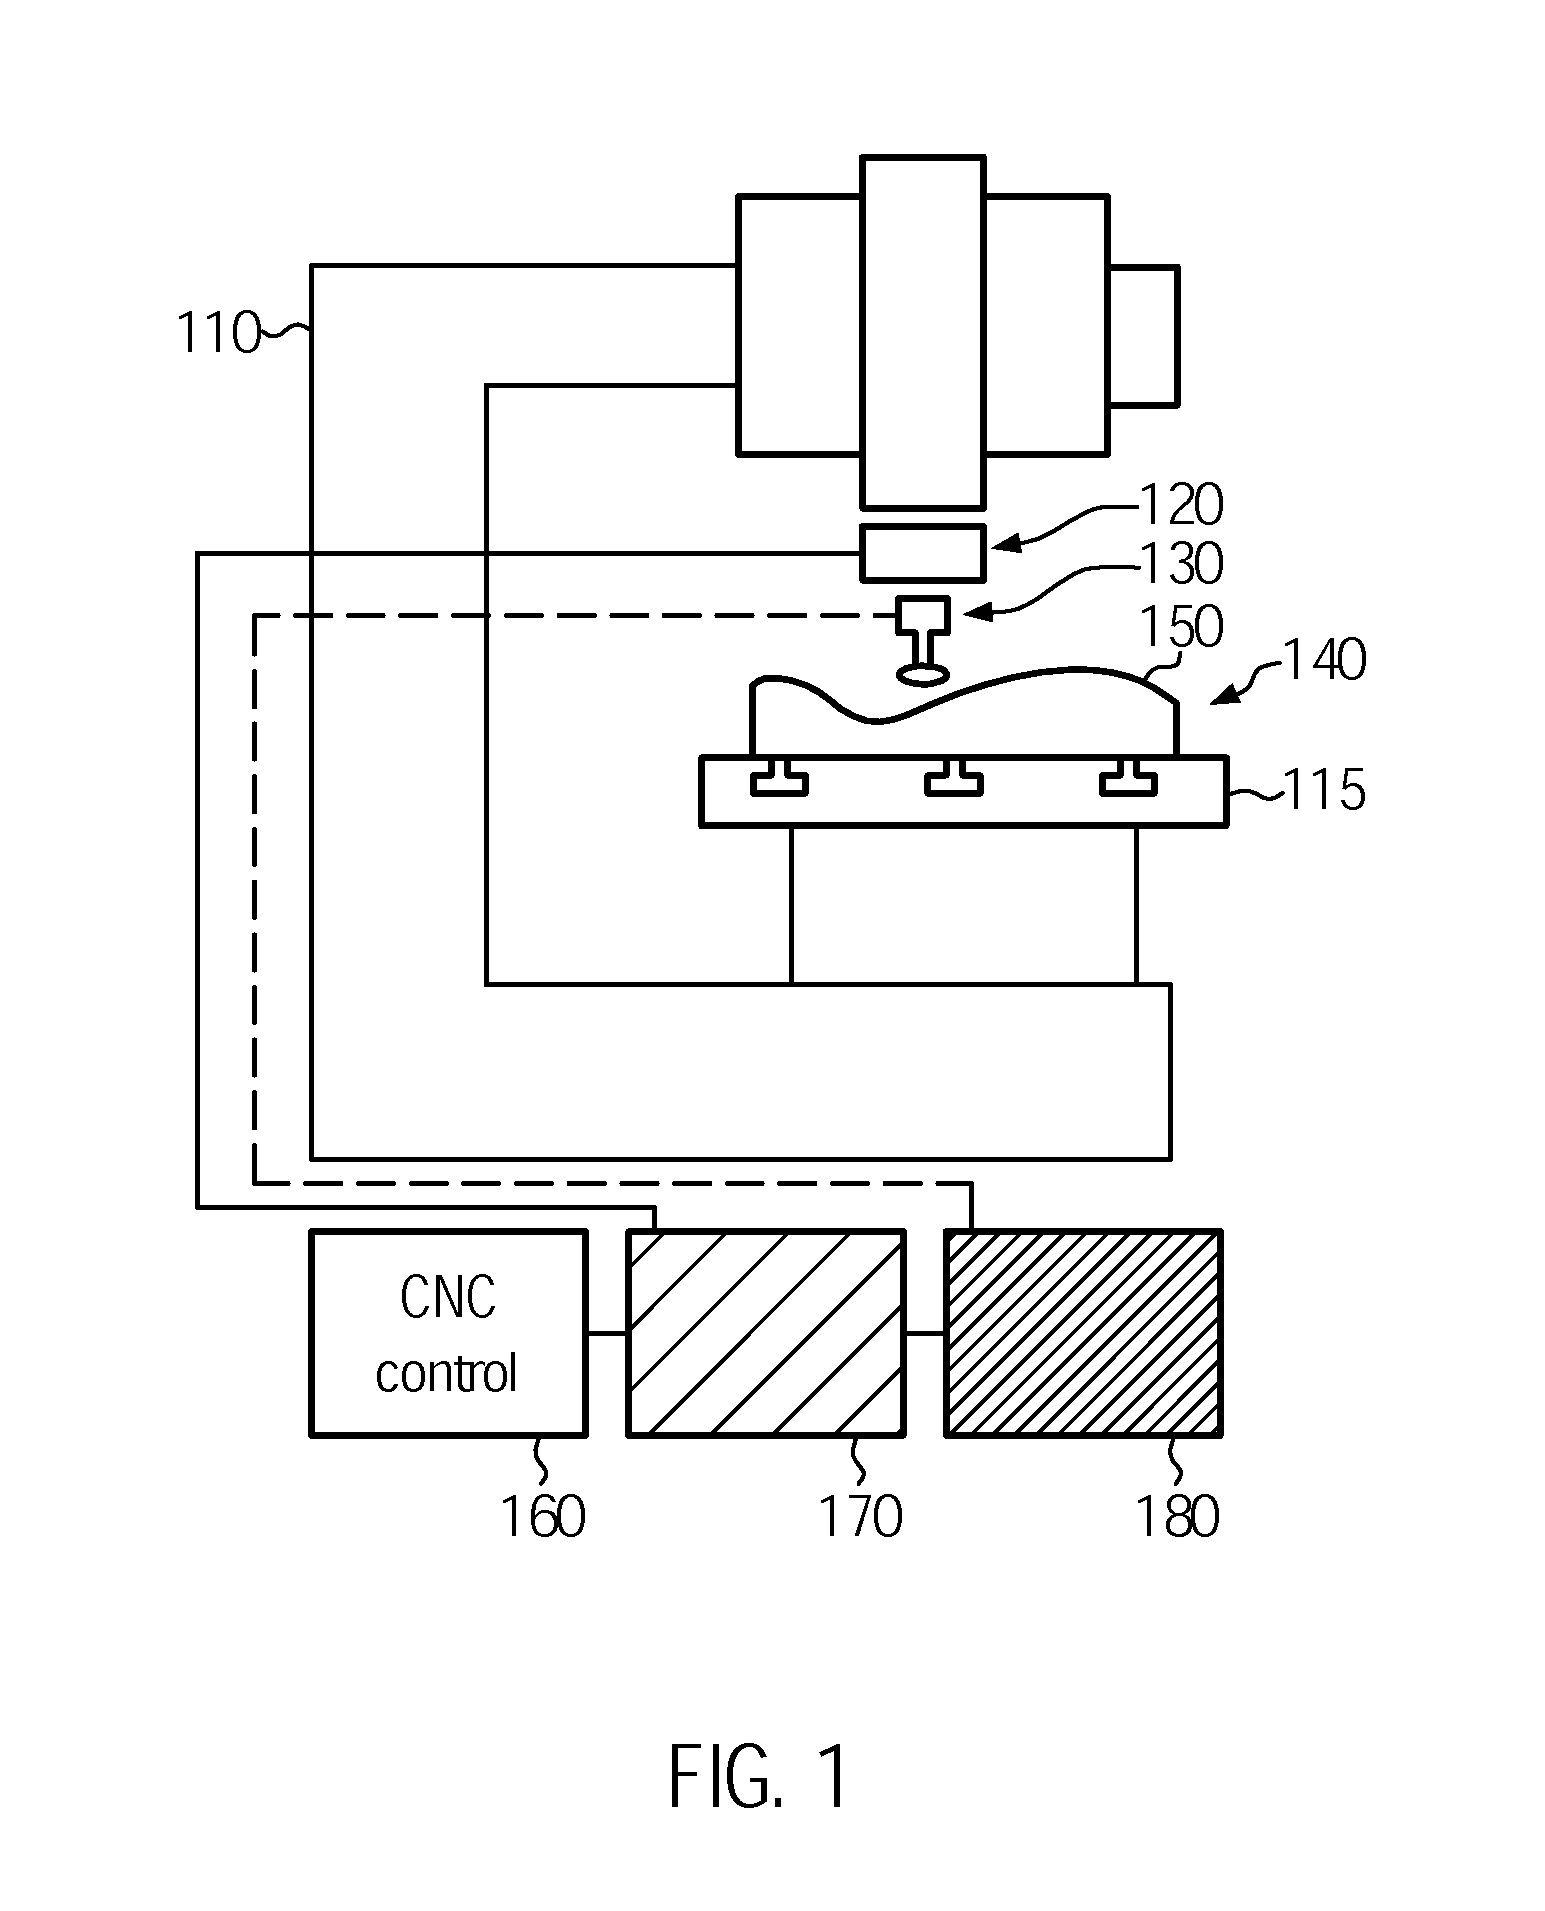 Method for moving a tool of a CNC machine over a surface